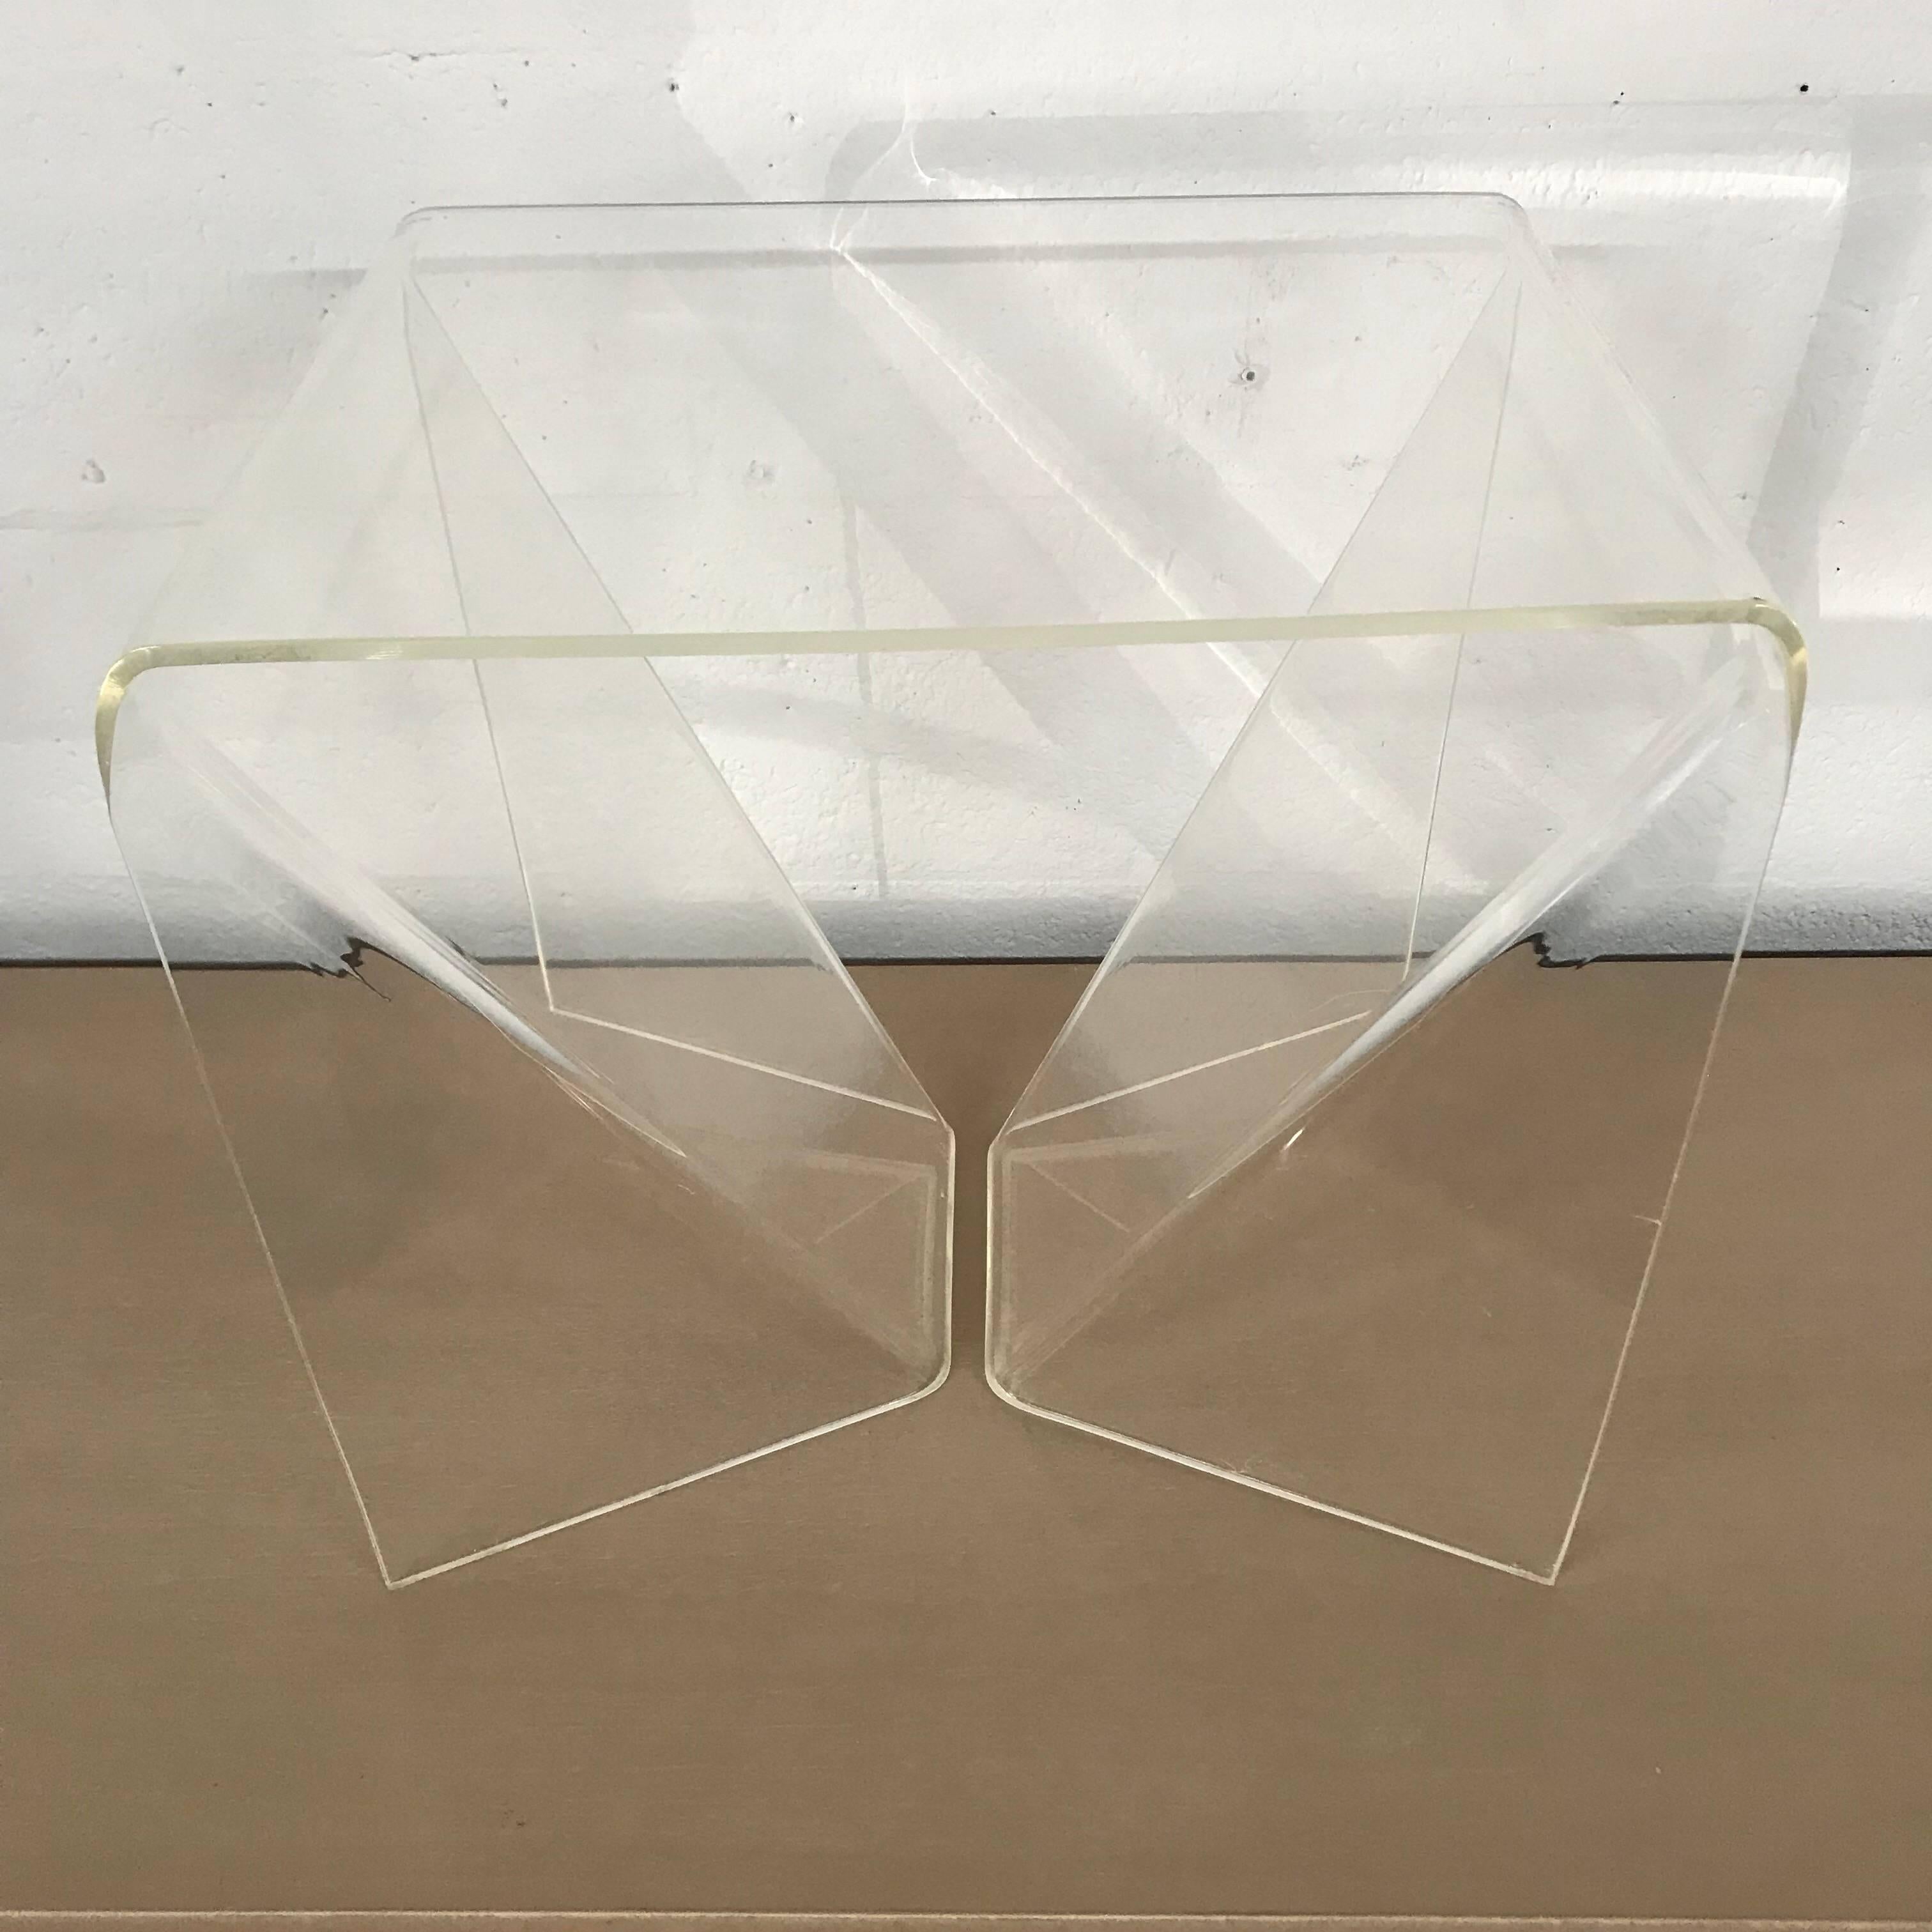 Folded Lucite table designed by Neal Small.